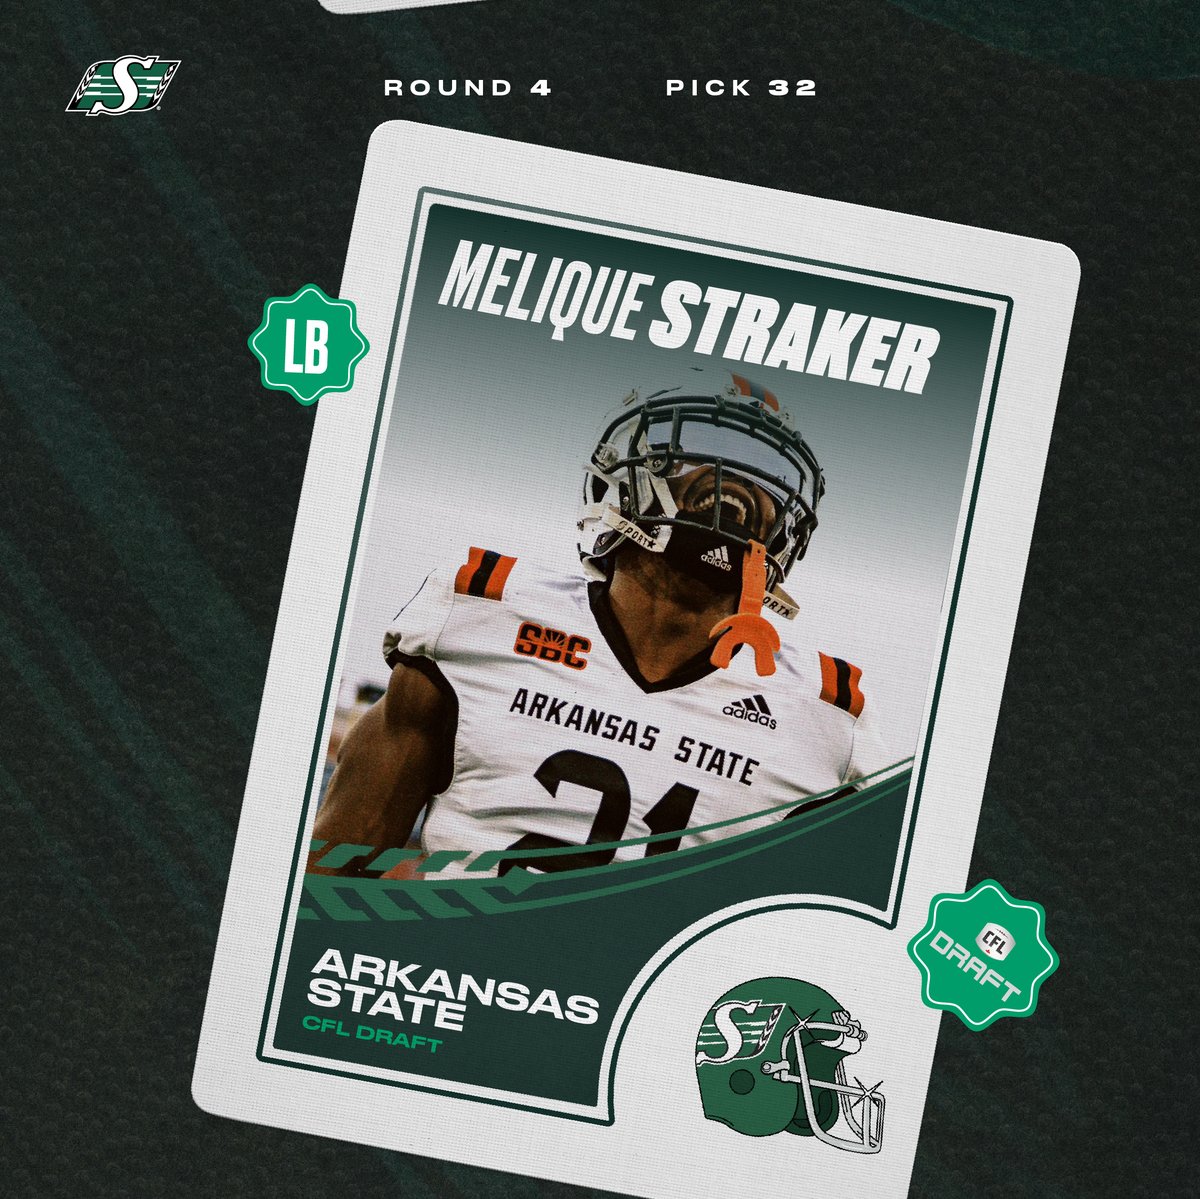 Some people have called Melique Straker rover, dimeback, or nickel corner... At Arkansas State, they simply called him 'a star'. We call him, the newest member of the Saskatchewan Roughriders, after making him our fourth-round pick! ❎ @_MS21DB 🎓 @AStateFB